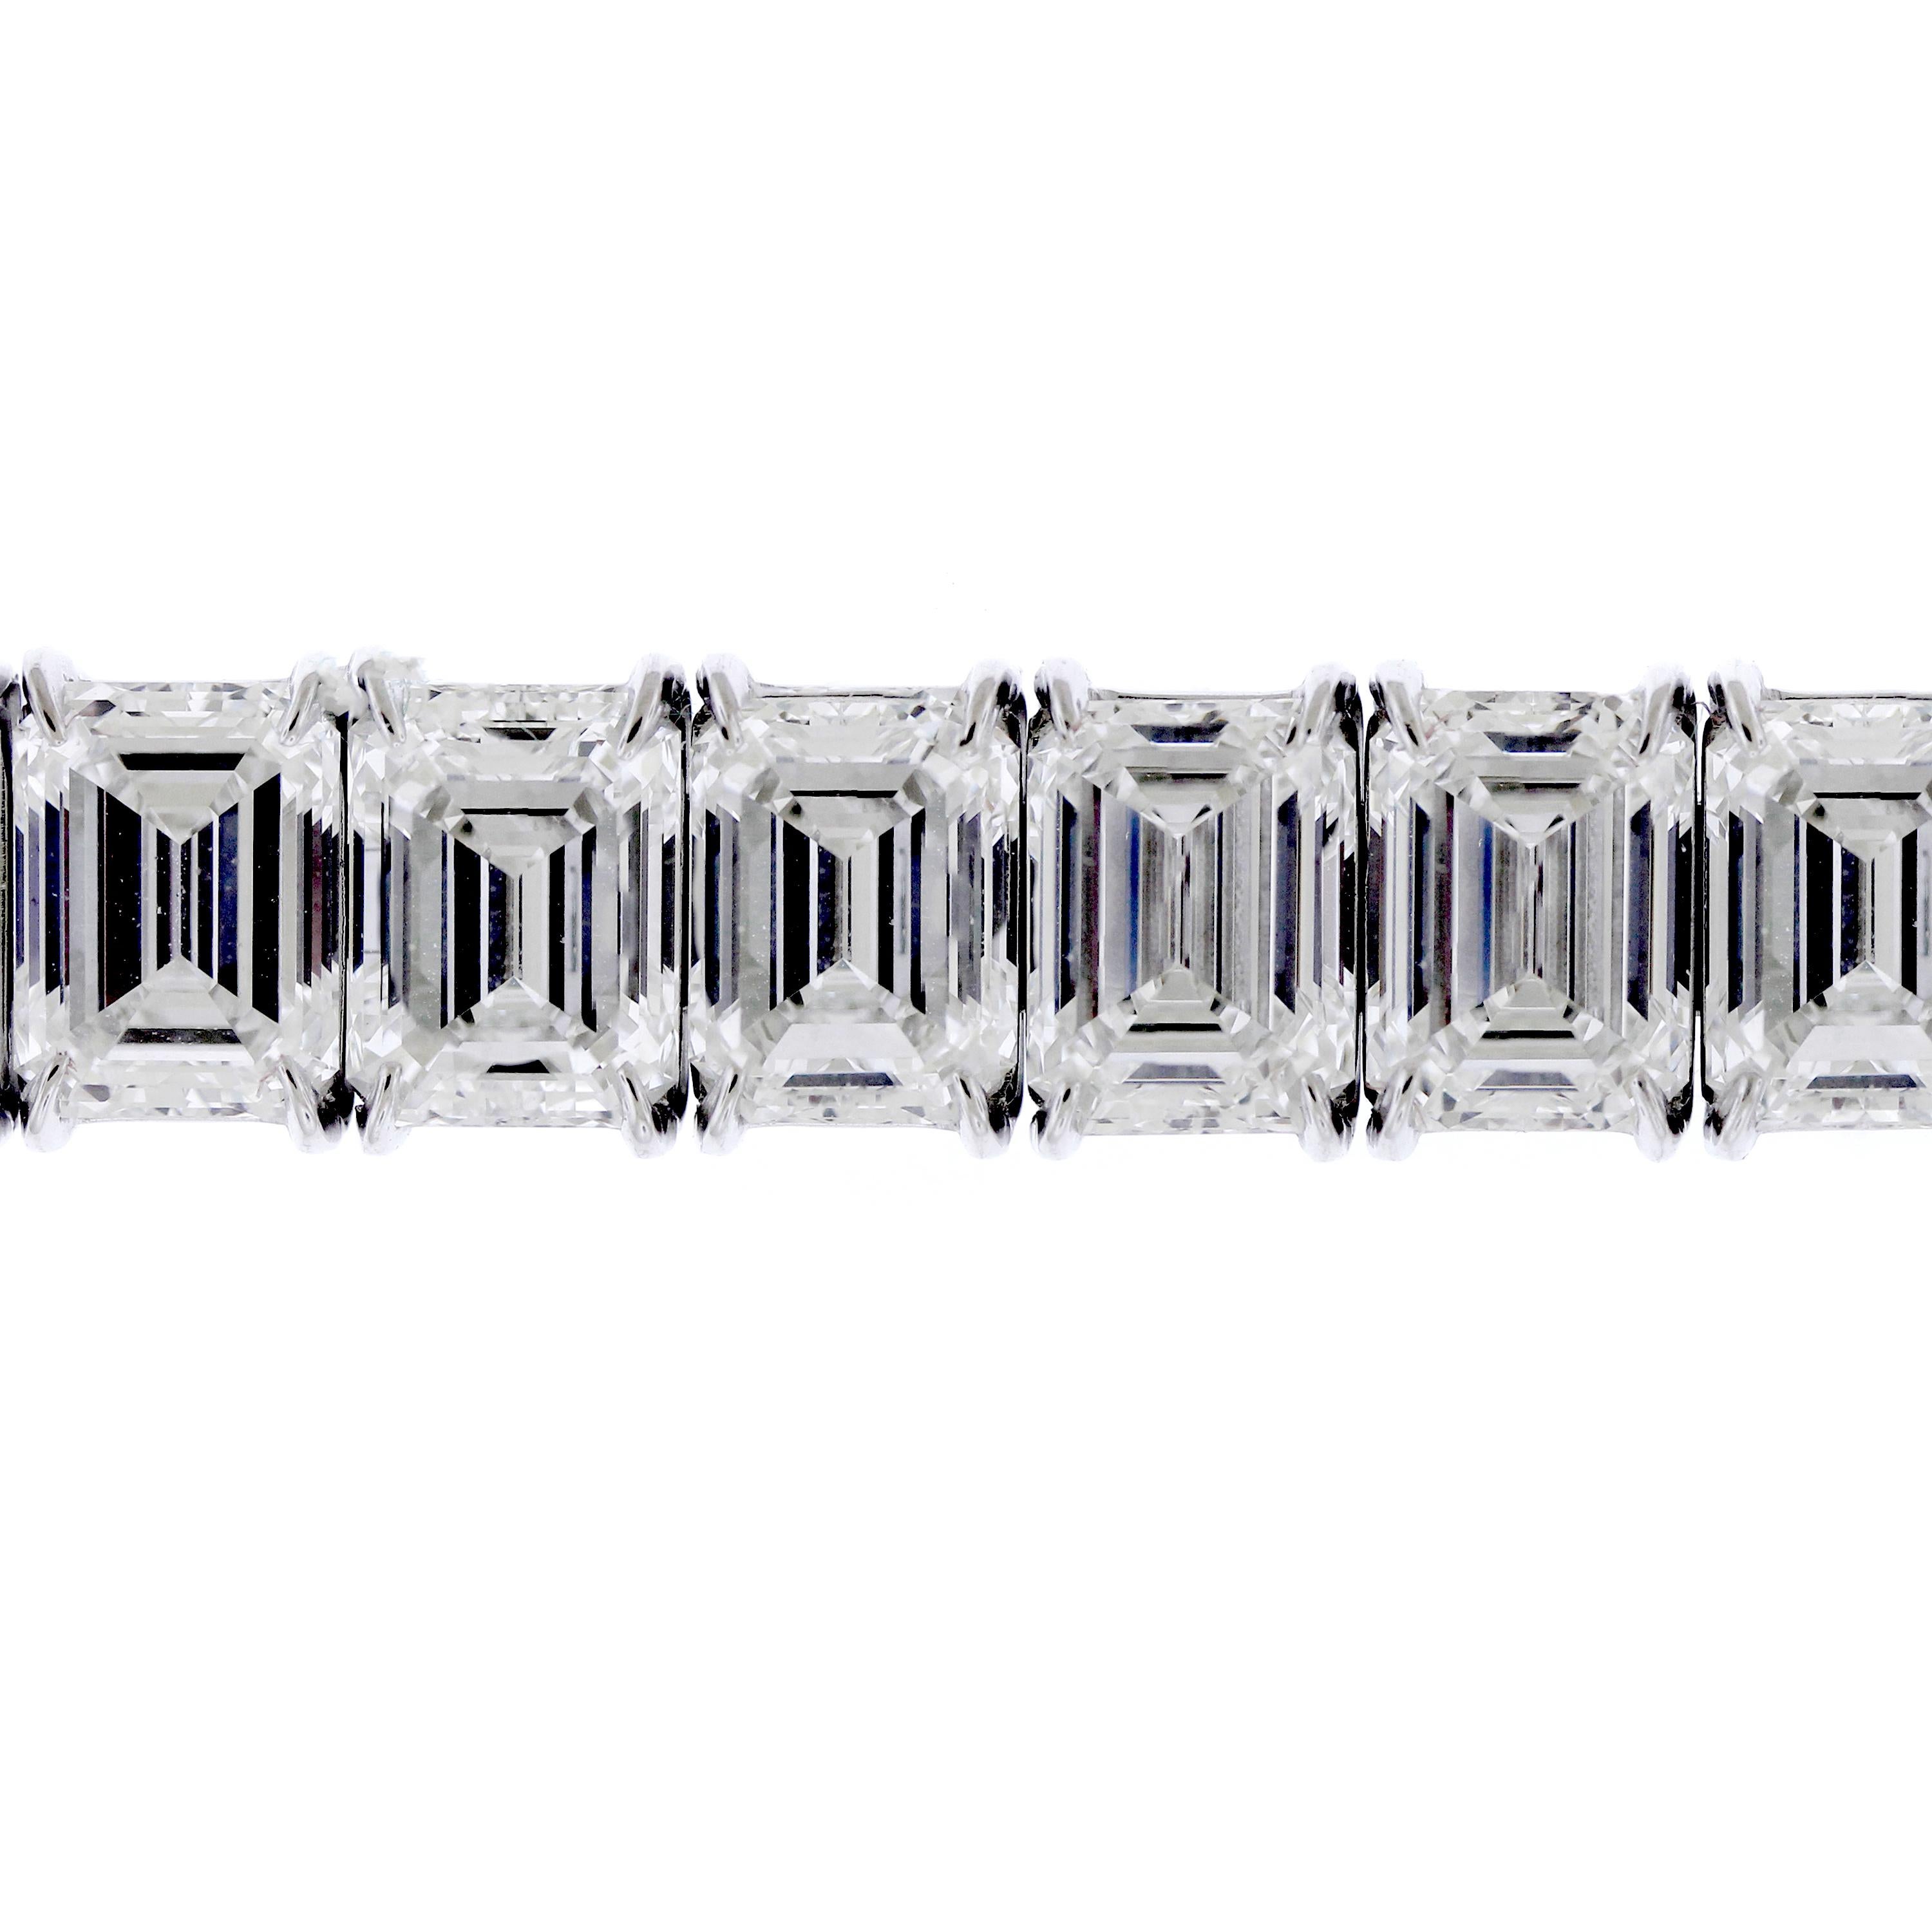 GIA Certified 56.62 Carat Emerald Cut Diamond Tennis Bracelet. 

Diamonds: Apprx. 56.62 carat Emerald Cut diamonds. Diamonds are H/I in color and VS2-VVS1 in clarity.  28 Emerald Cut Diamonds total. Diamonds average 2 carat each.

Each single